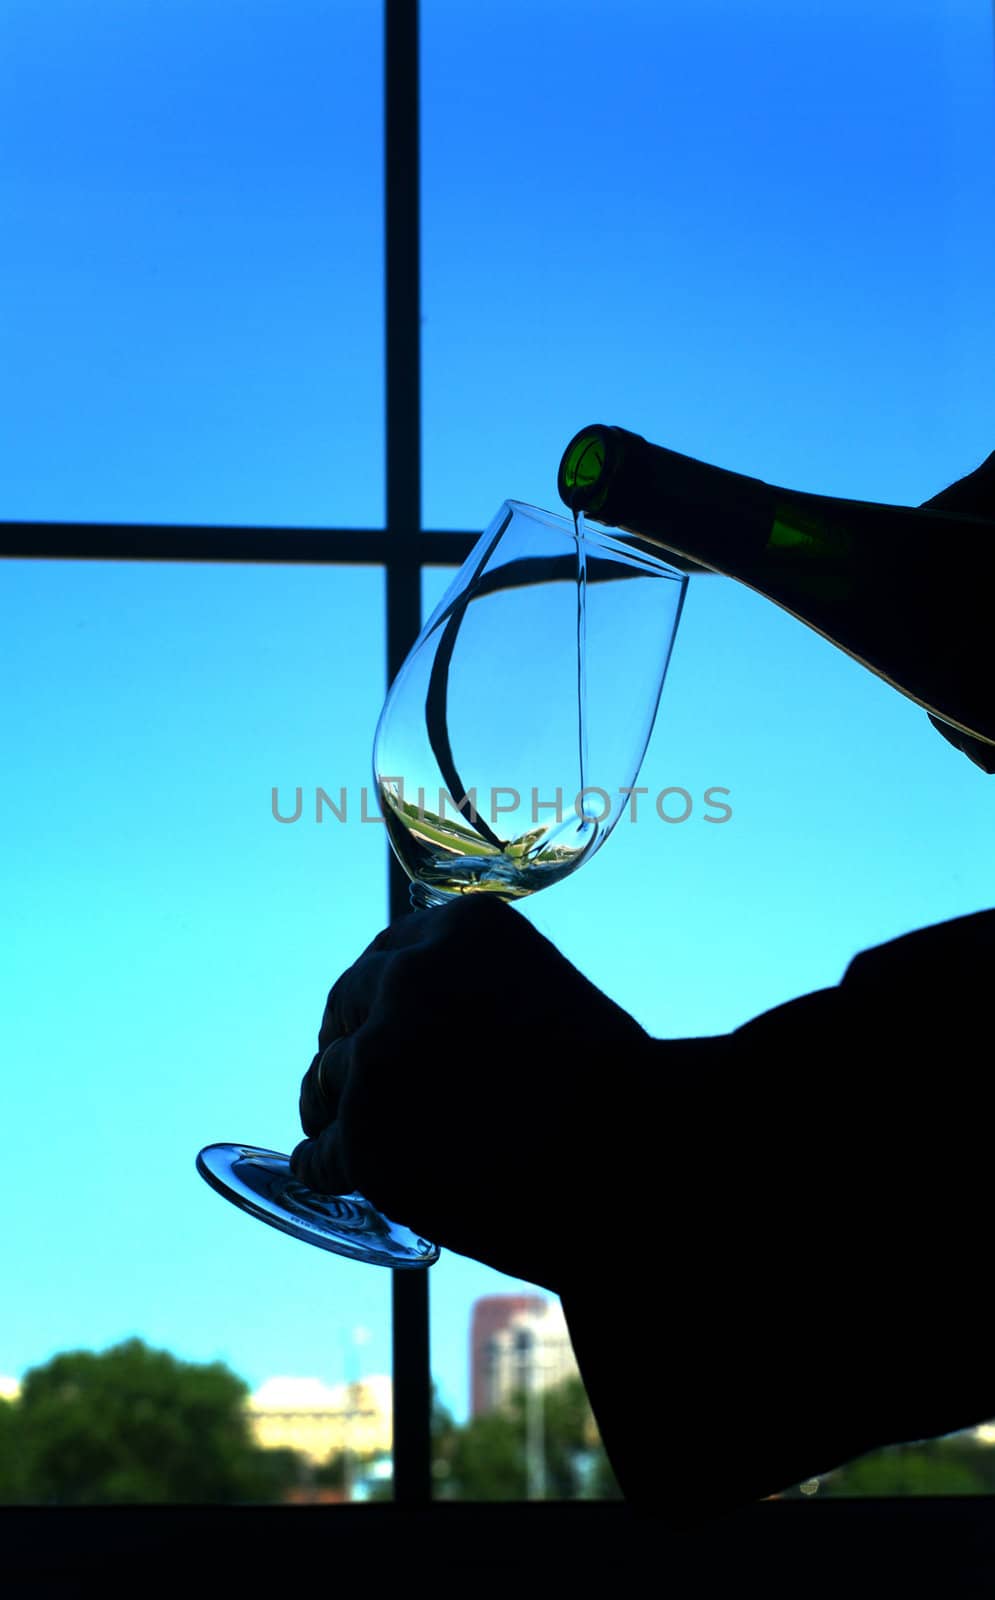 Silhouette of wine being poured into a glass against window and blue sky